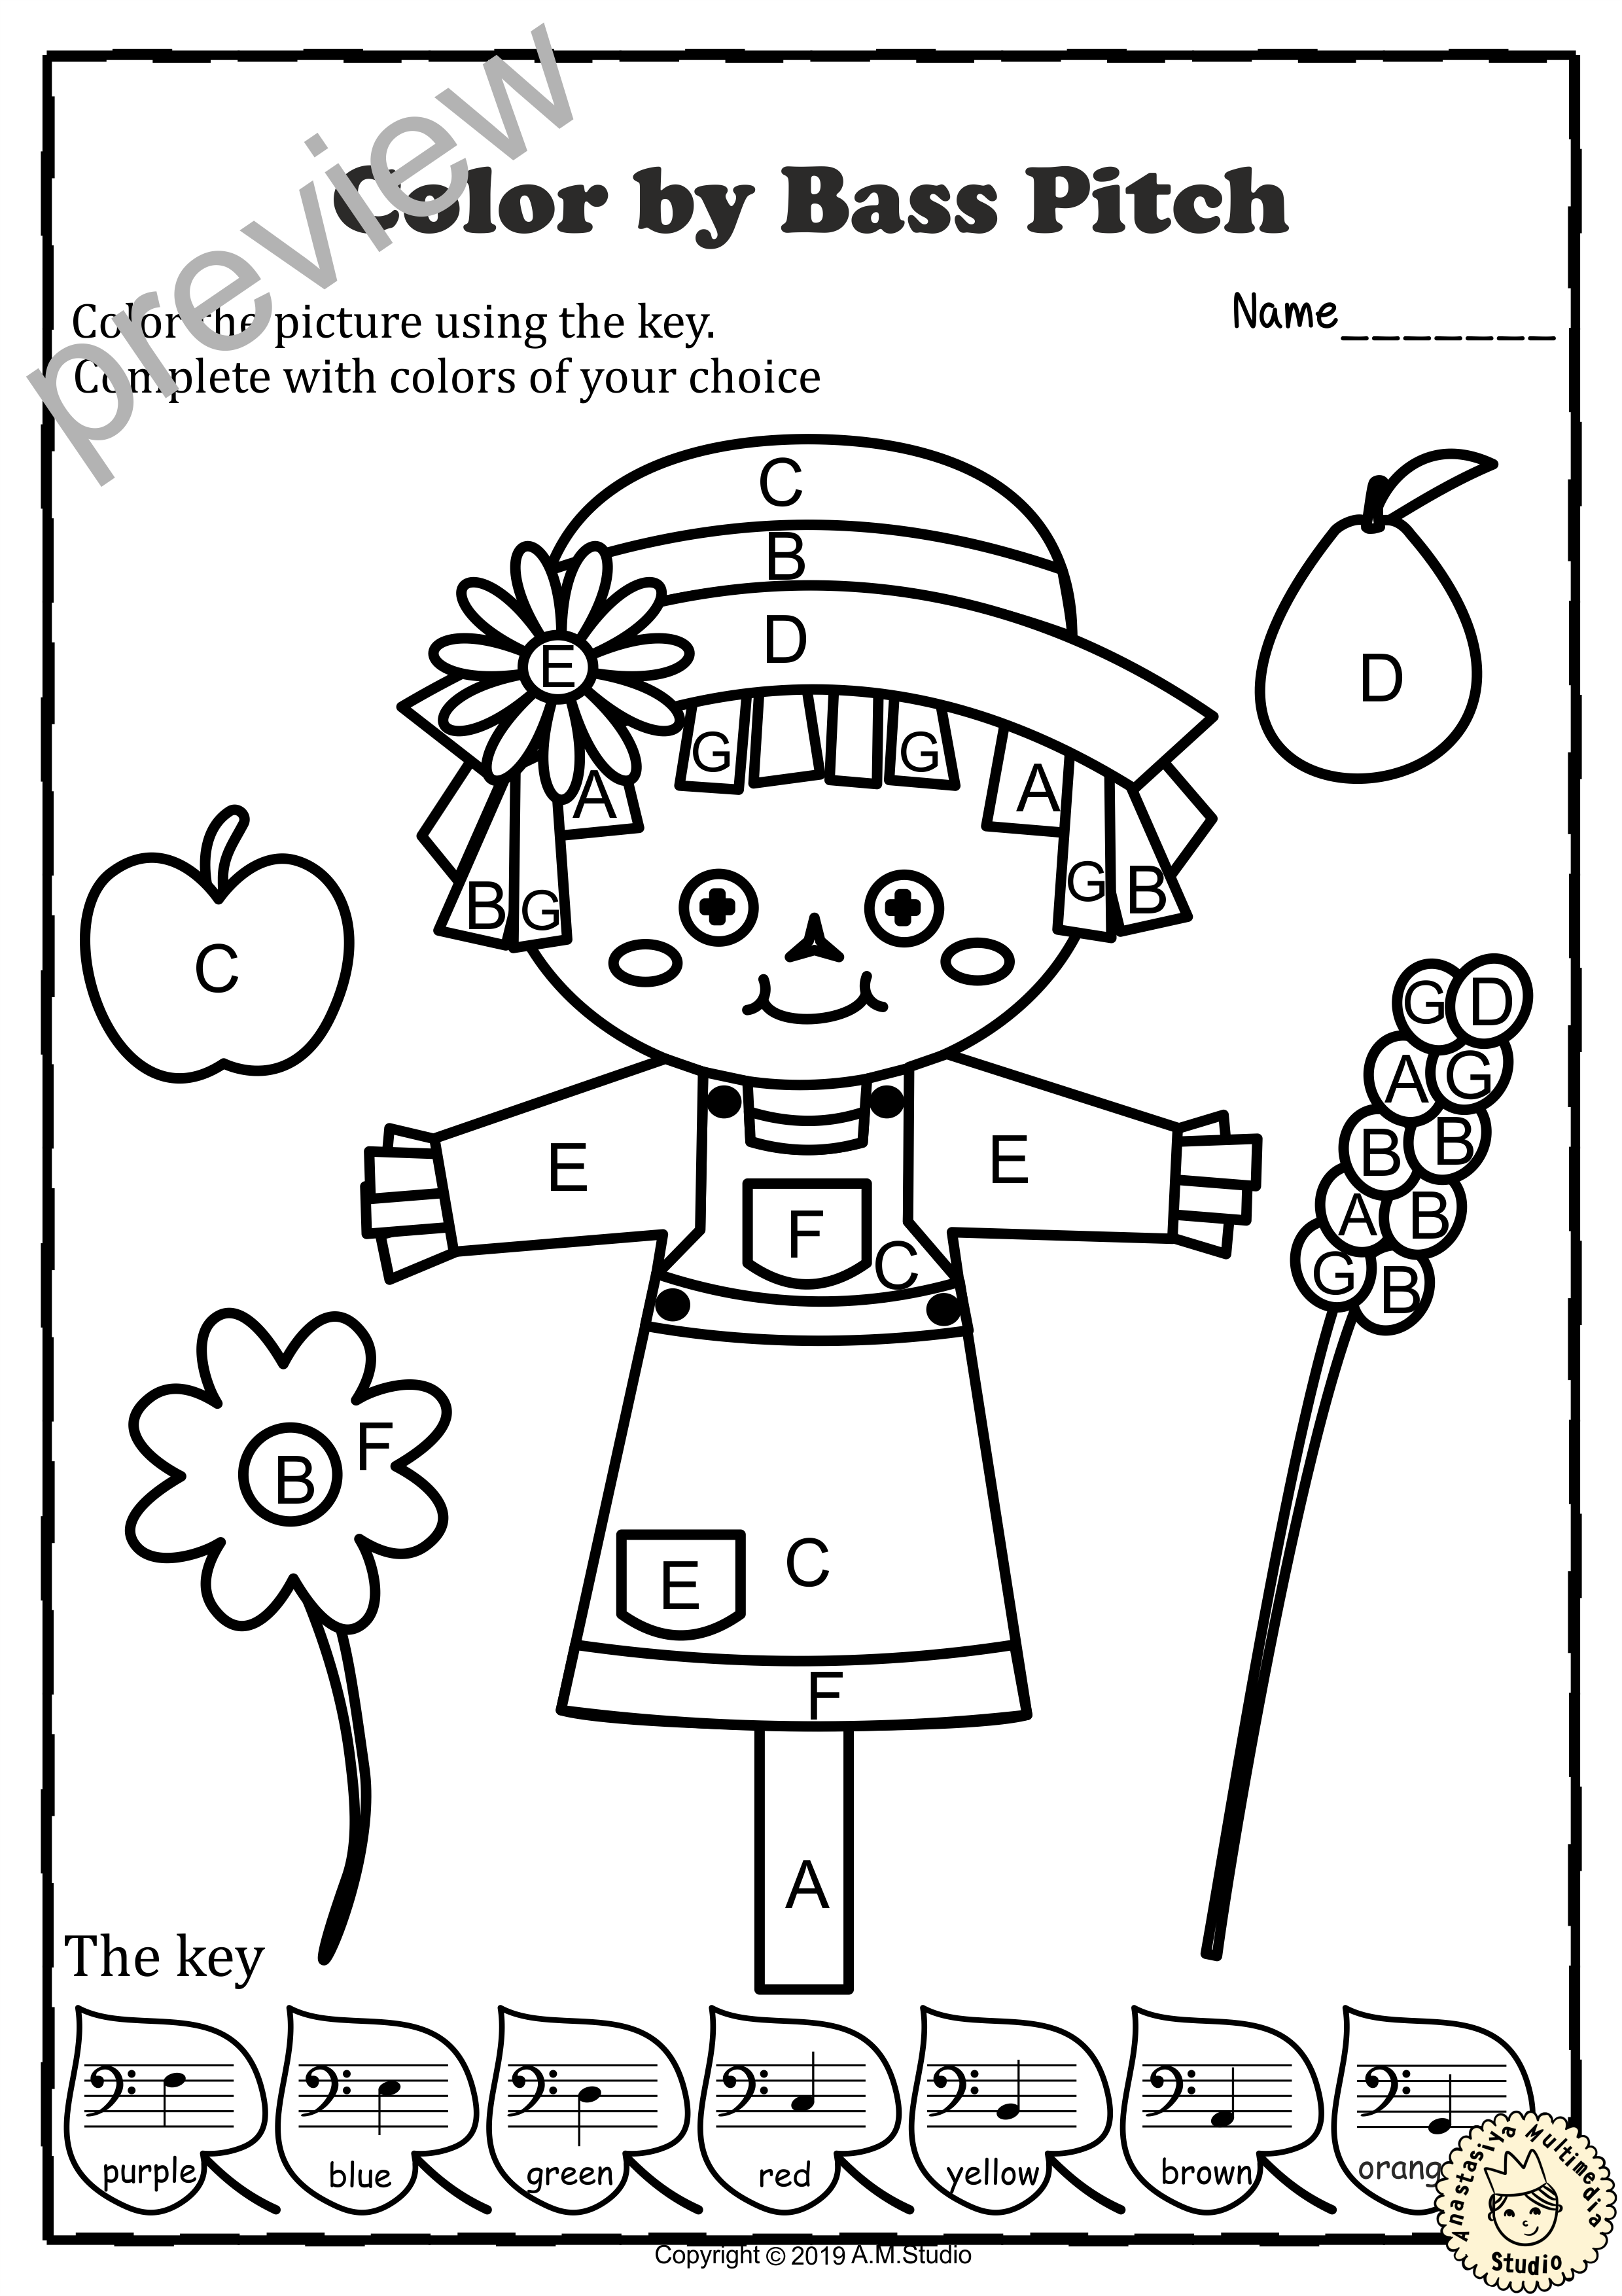 Musical Coloring Pages for Fall {Color by Bass Pitch} with answers (img # 1)